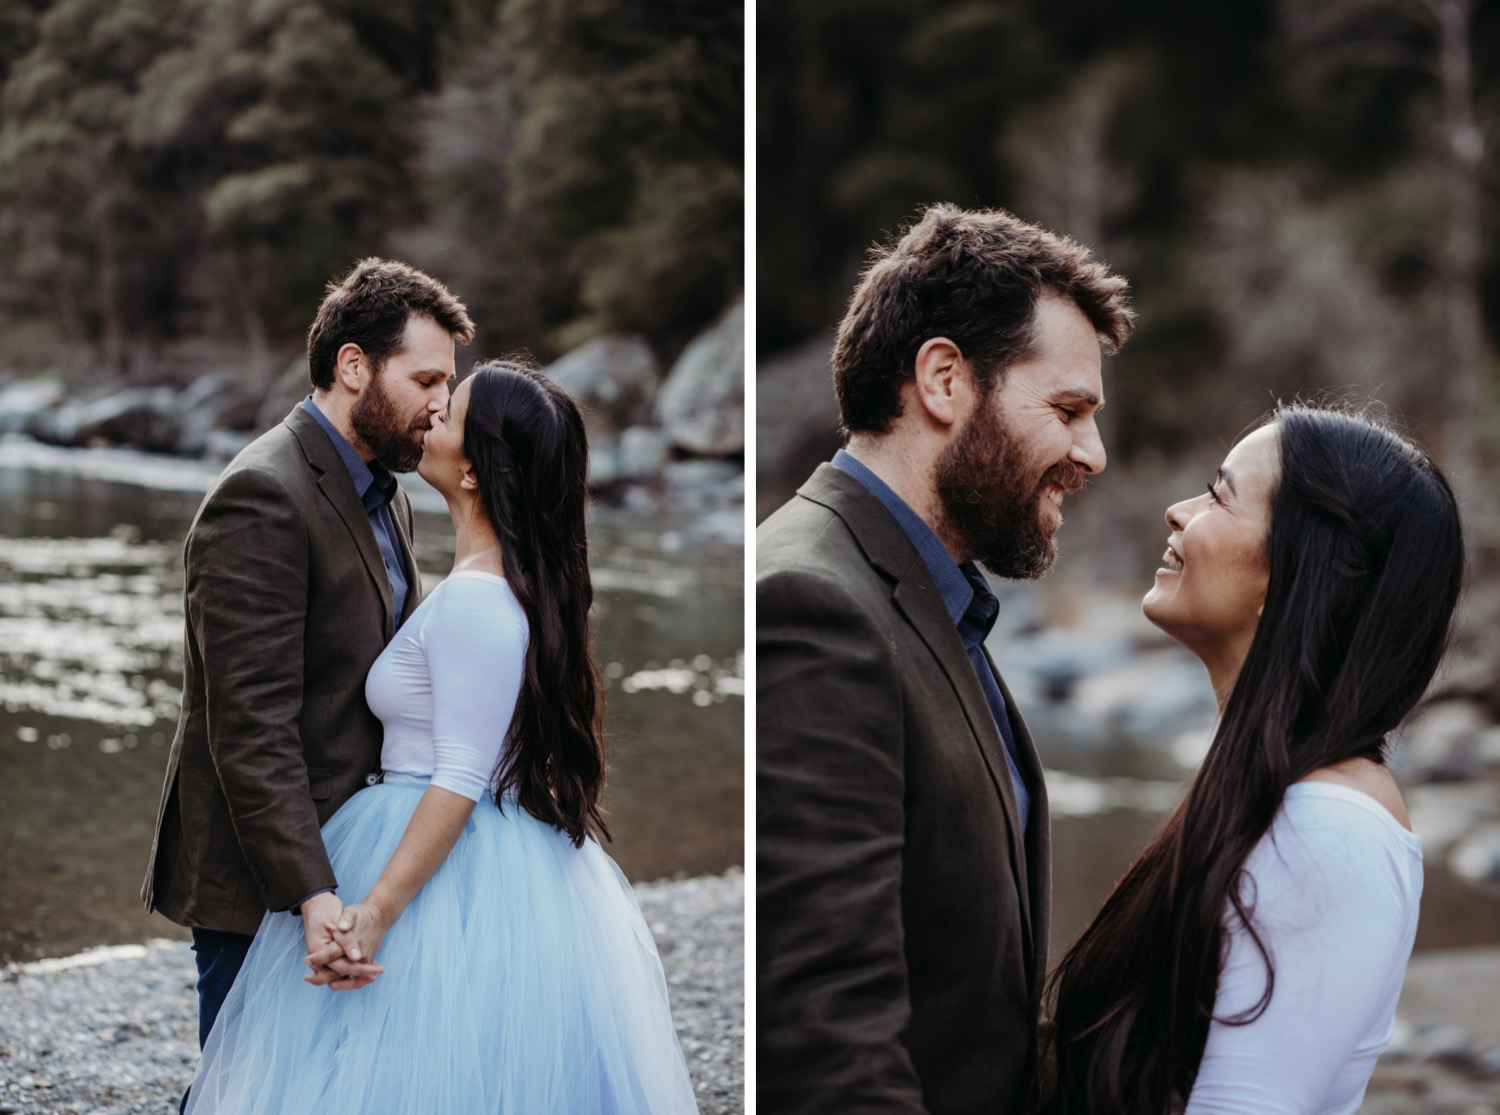 Couple kisses alongside the American River during their outdoor engagement photoshoot.